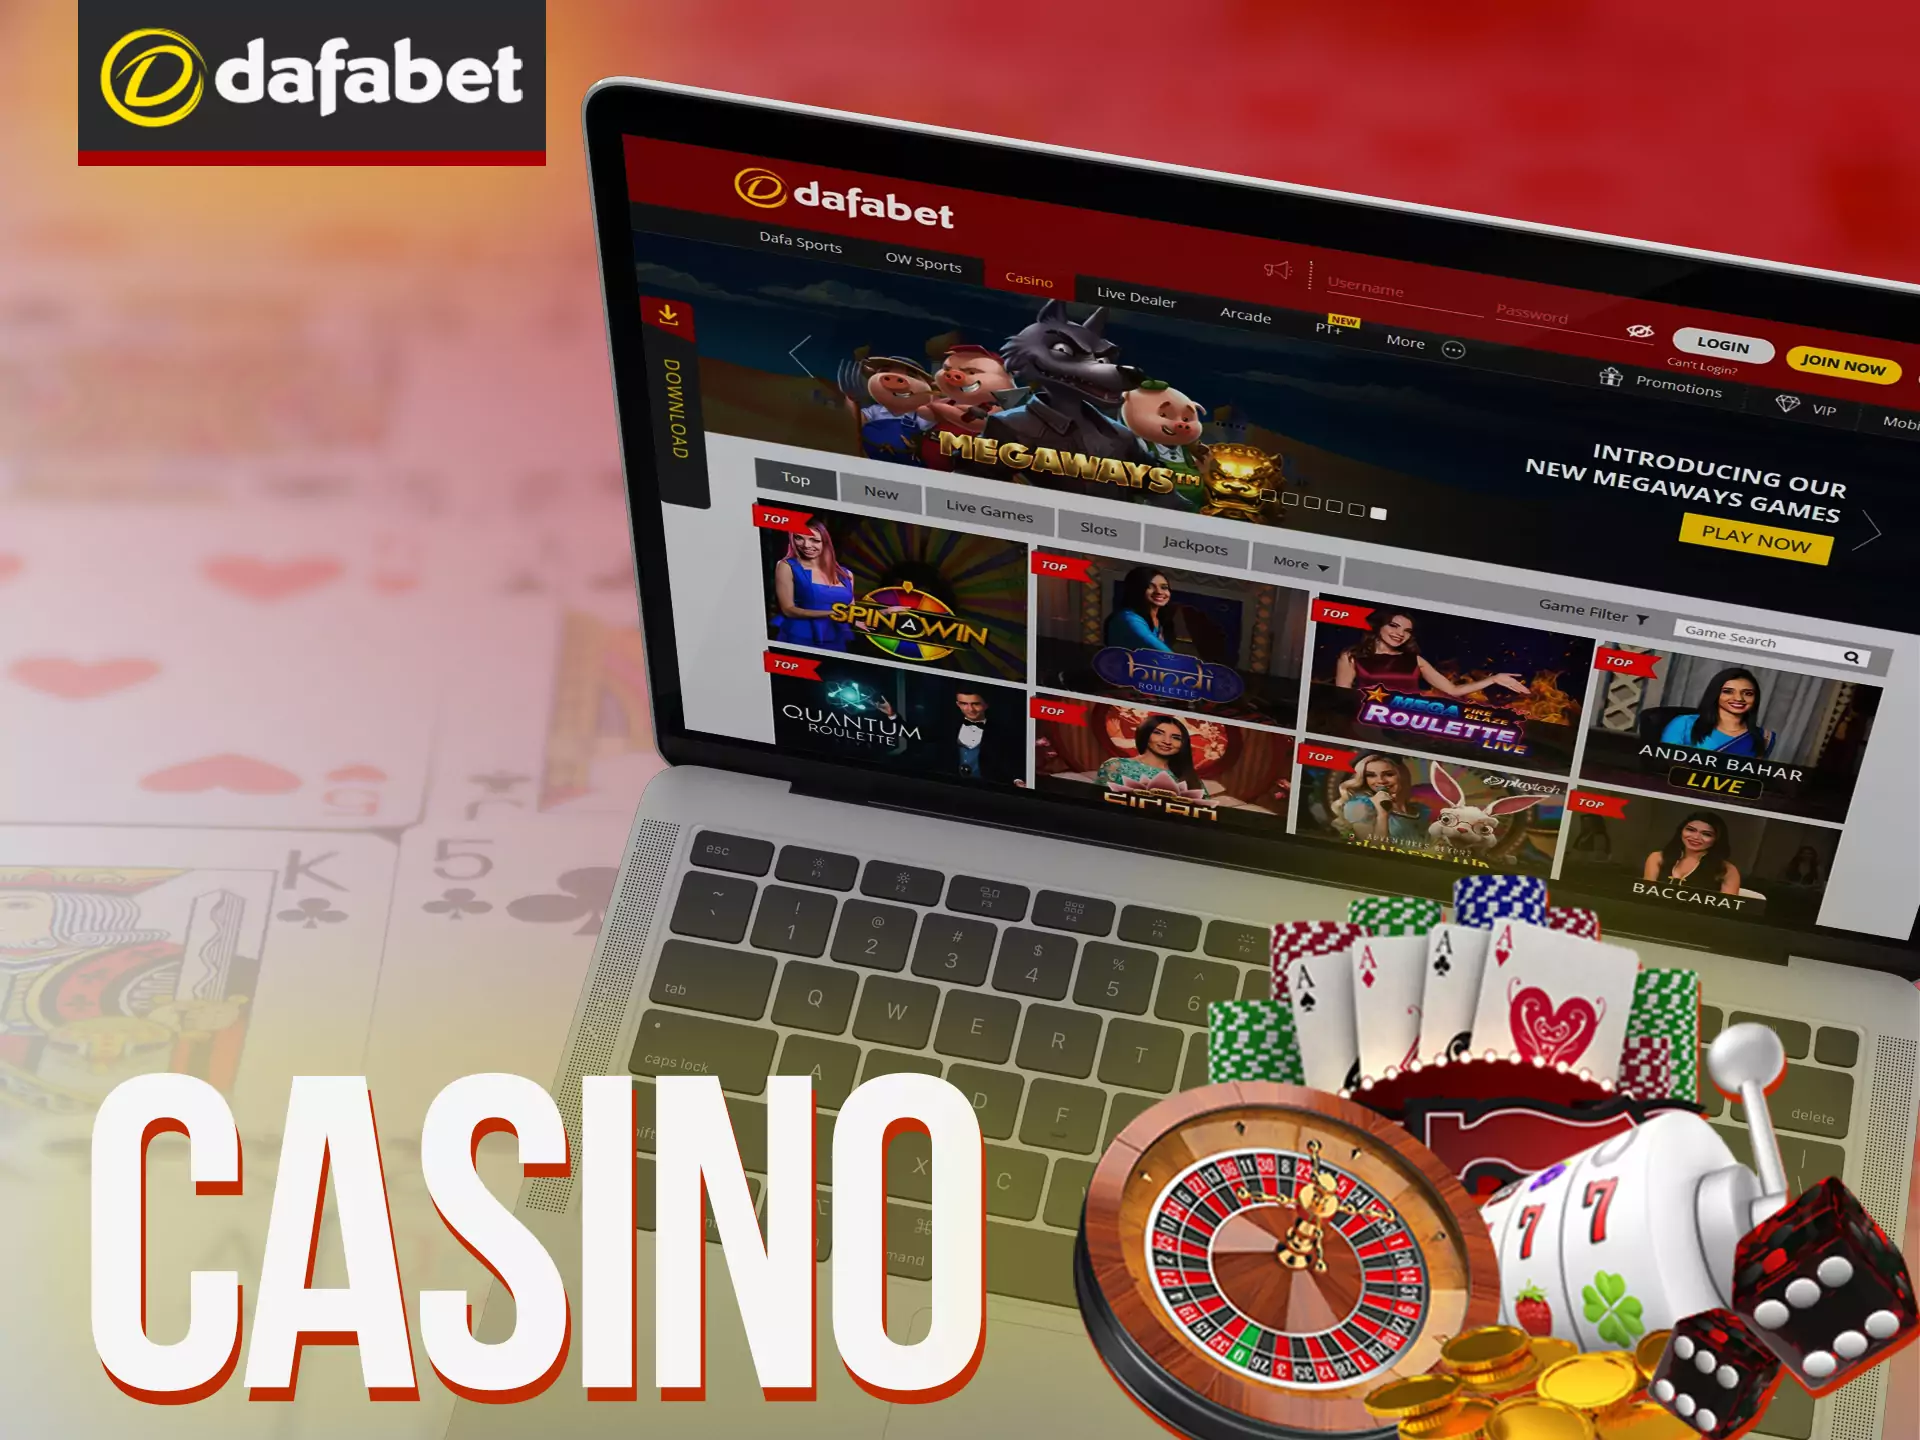 Have fun playing baccarat, poker and other games at Dafabet Casino.